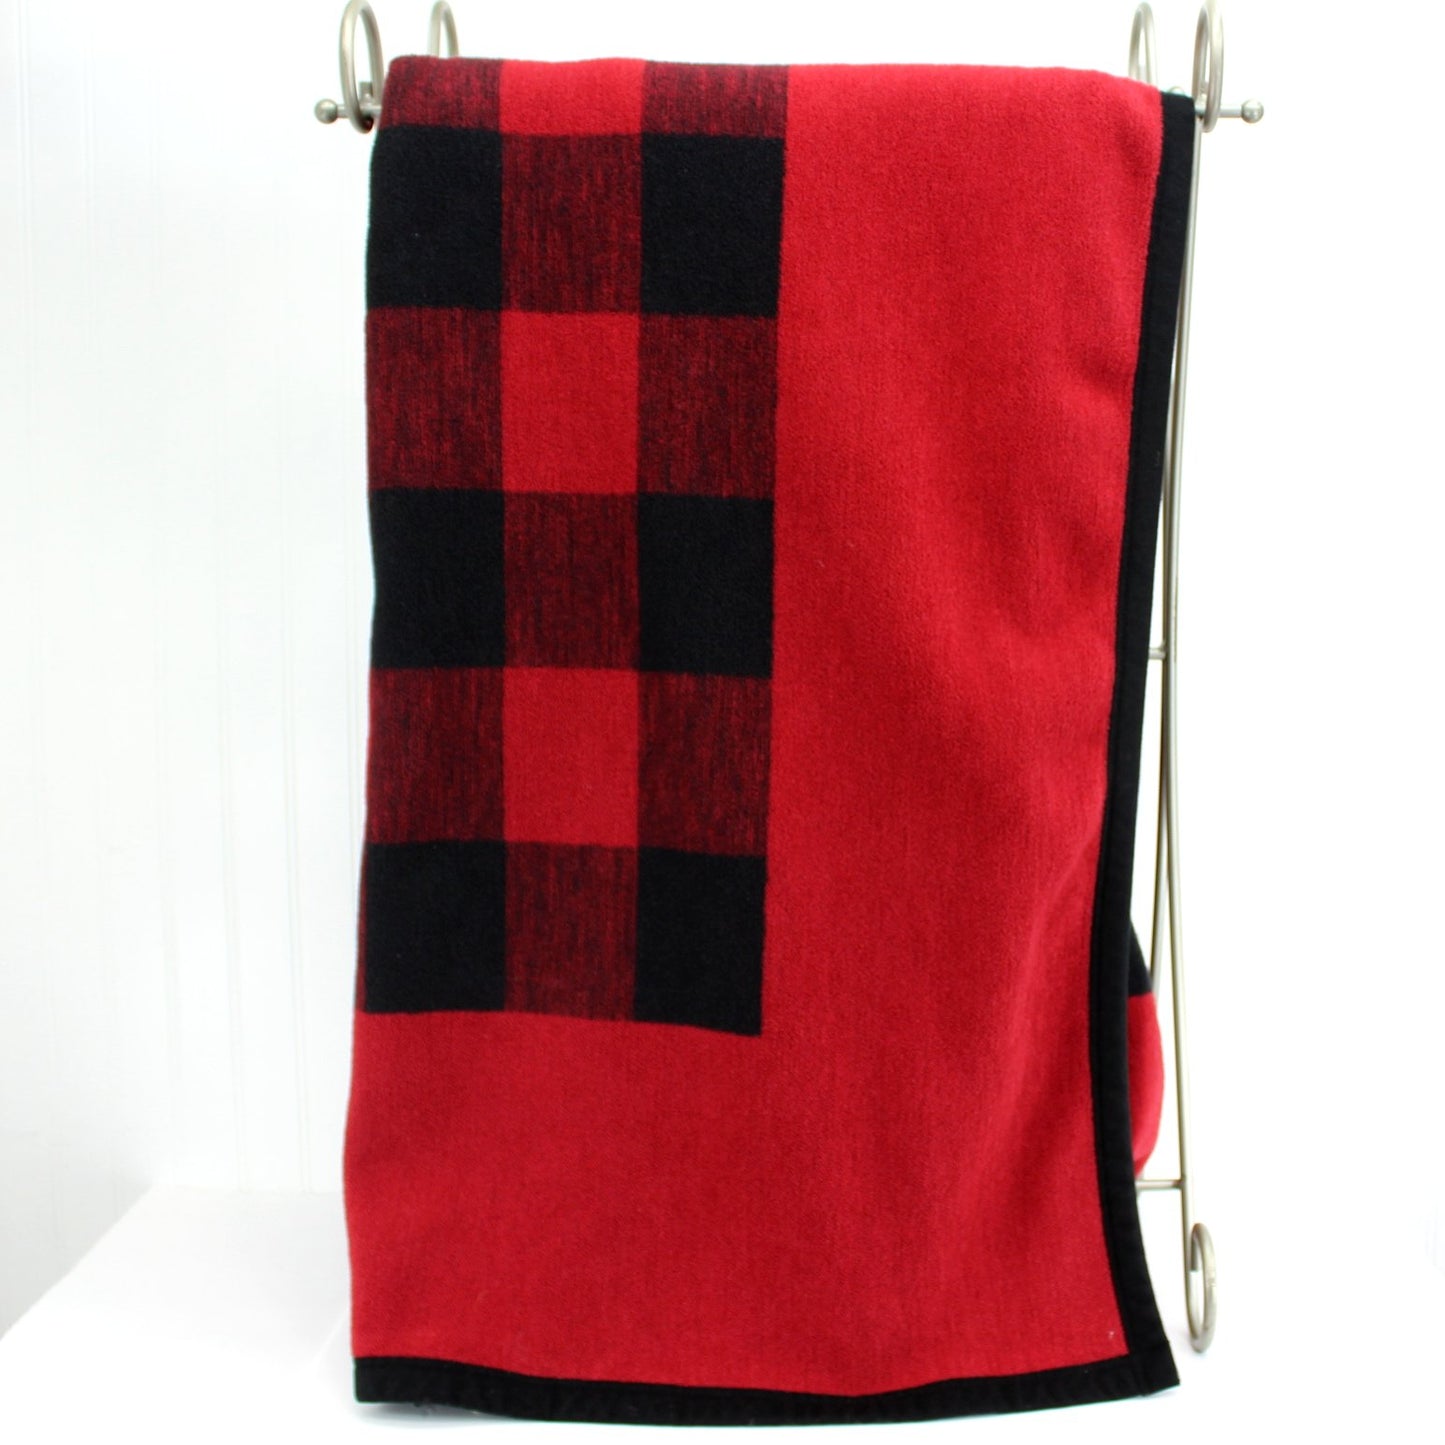 Woolrich Home Polyester Blanket Black Red Washable Large 80" X 74" vertical view of blanket design